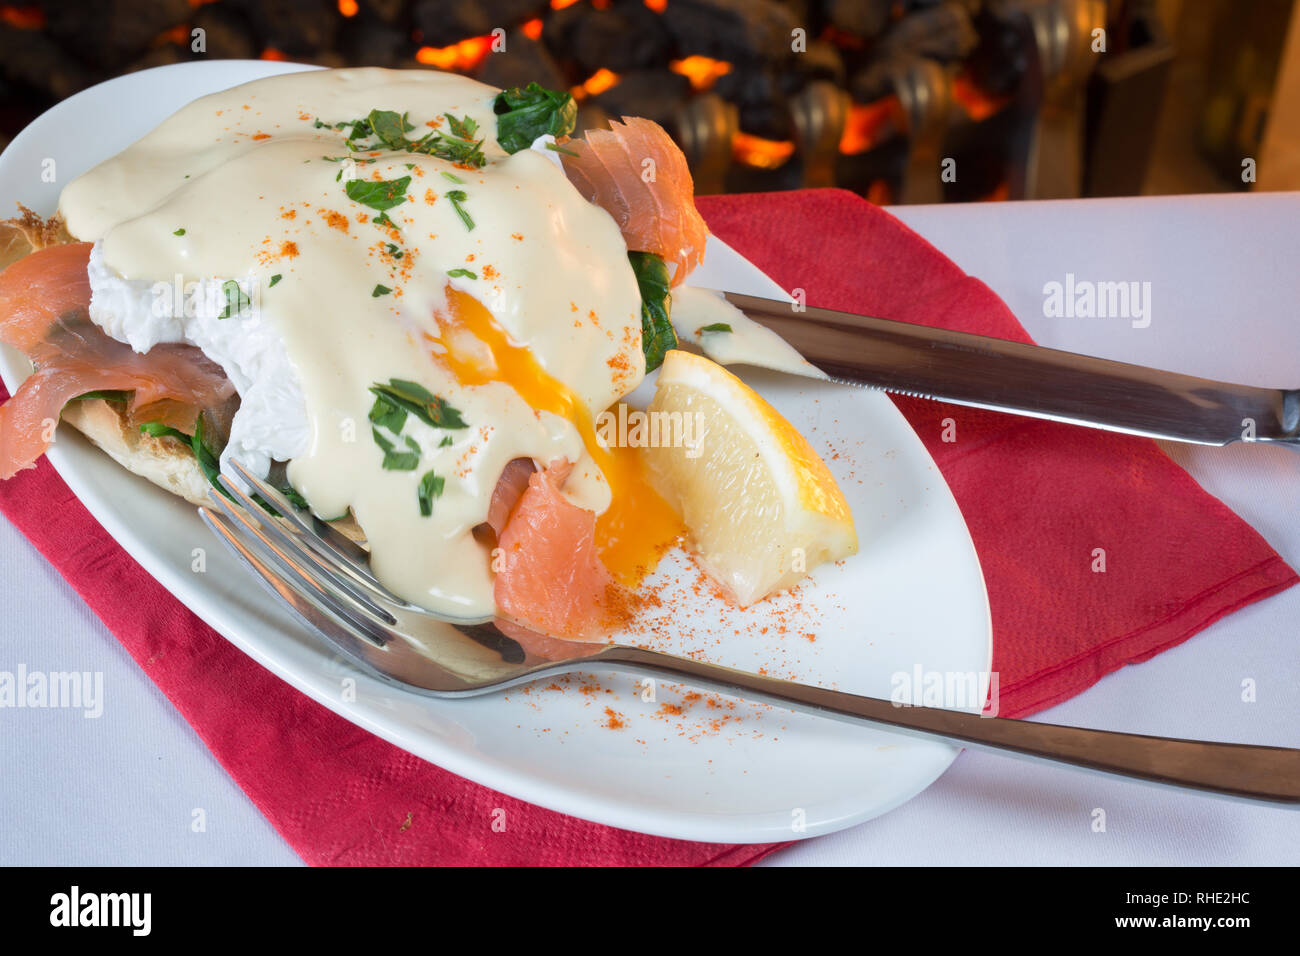 A plate of Eggs Benedict served for breakfast Stock Photo